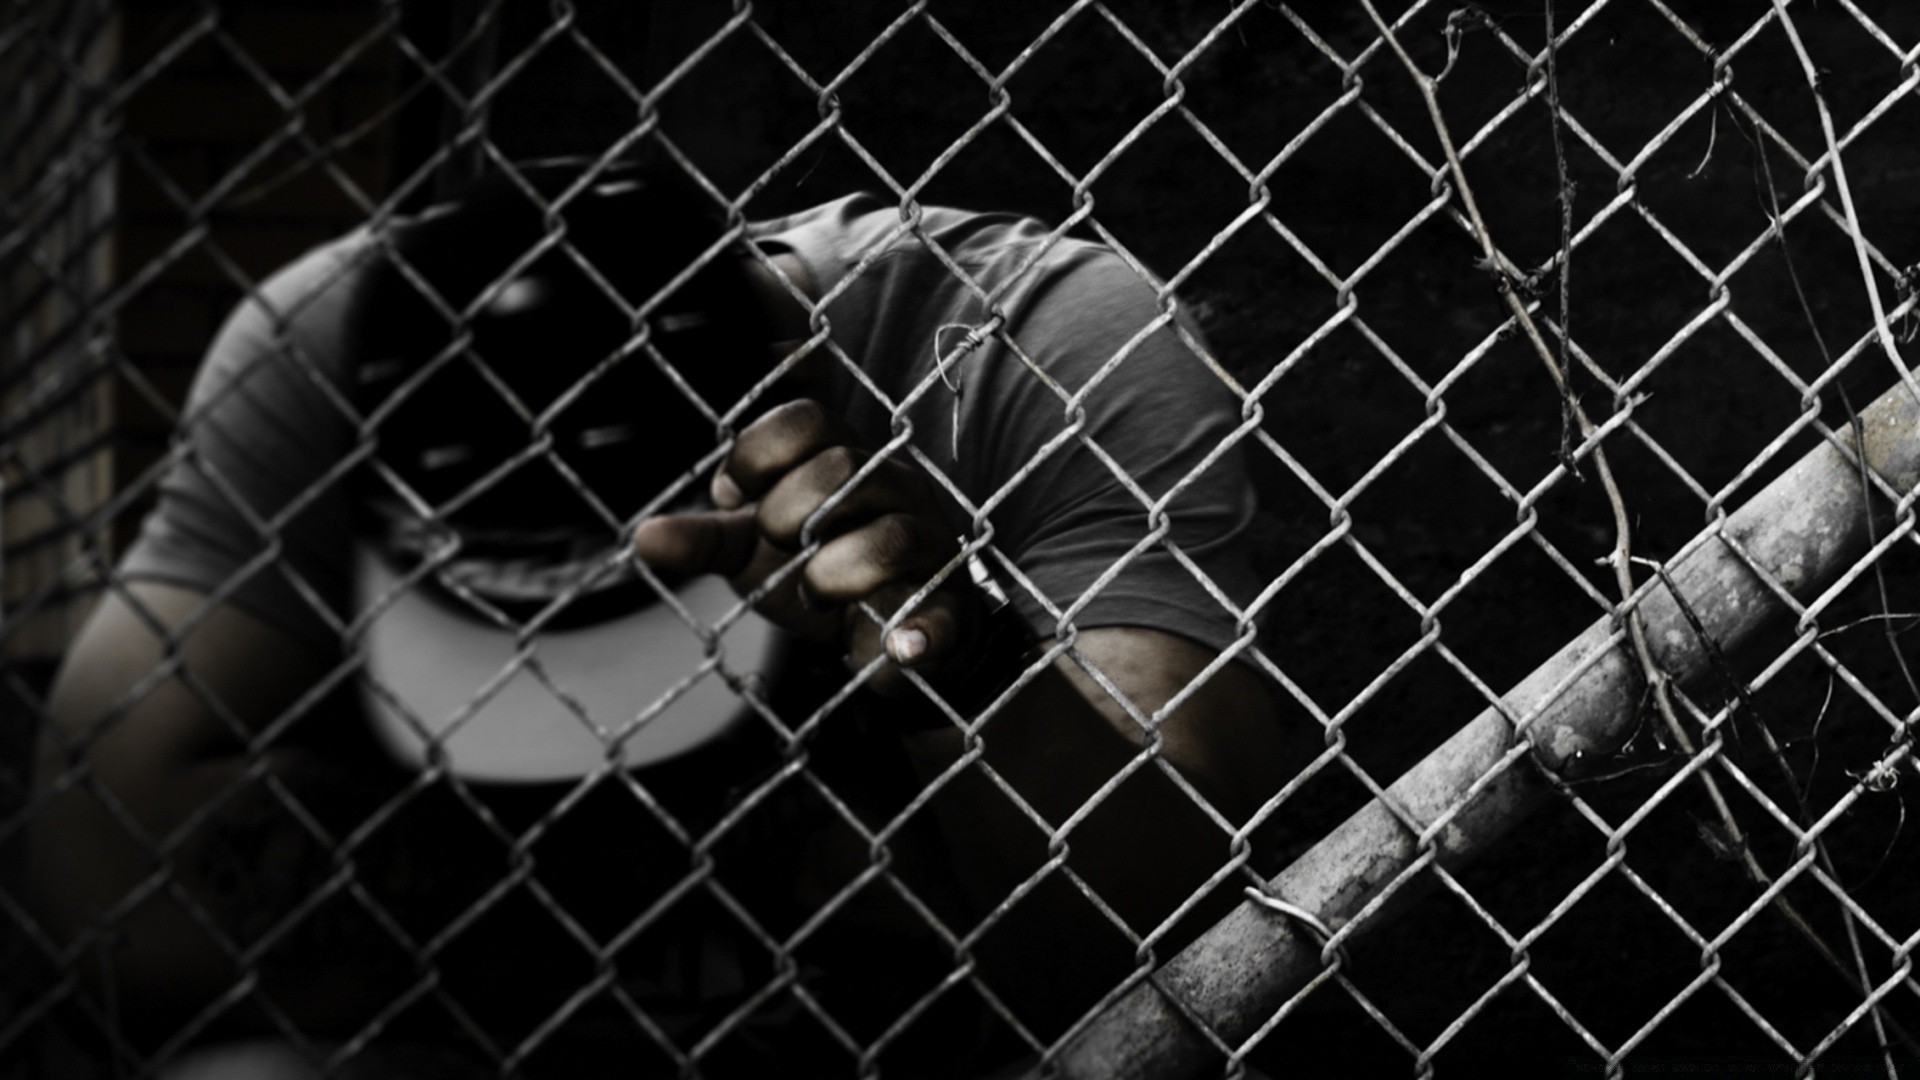 1920x1080 Urban cage web fence security jail barbed wire wire net HD wallpaper.  Android wallpapers for free.